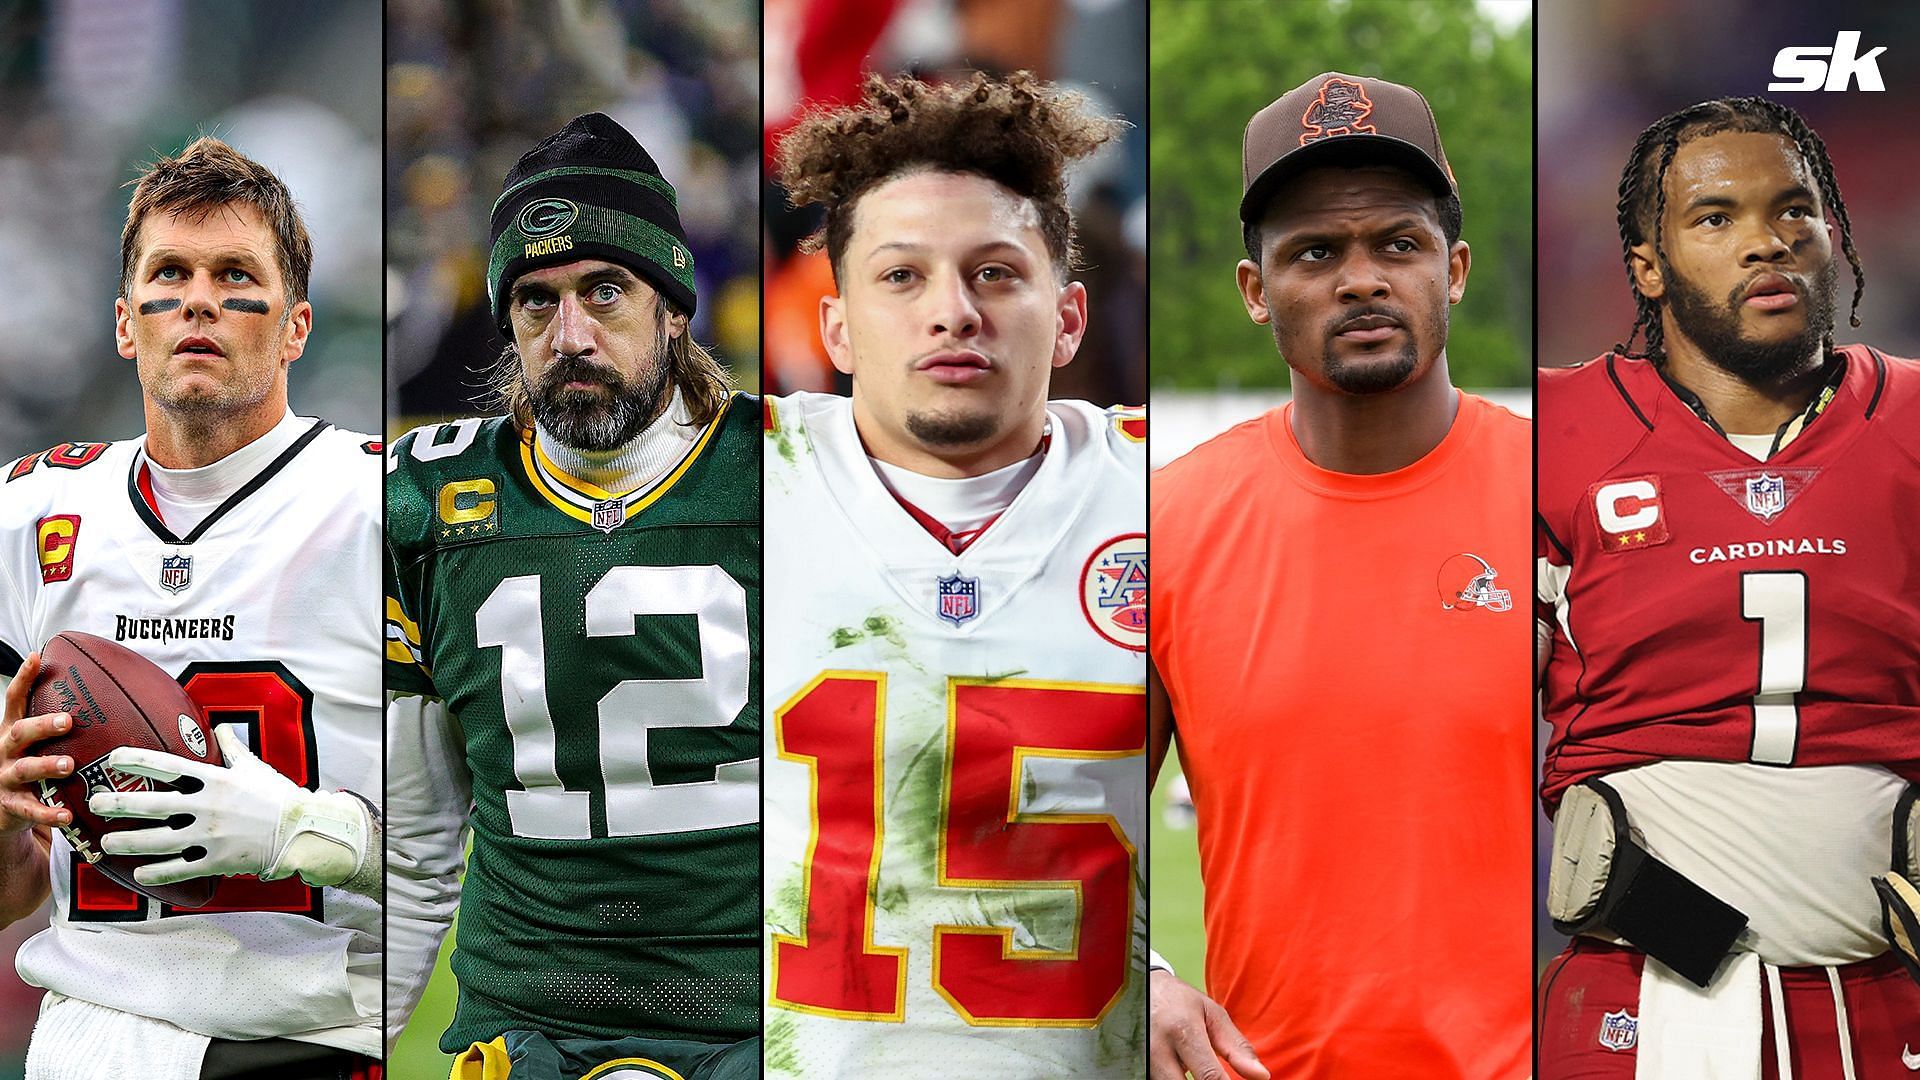 Who are the highest-earning players in NFL?